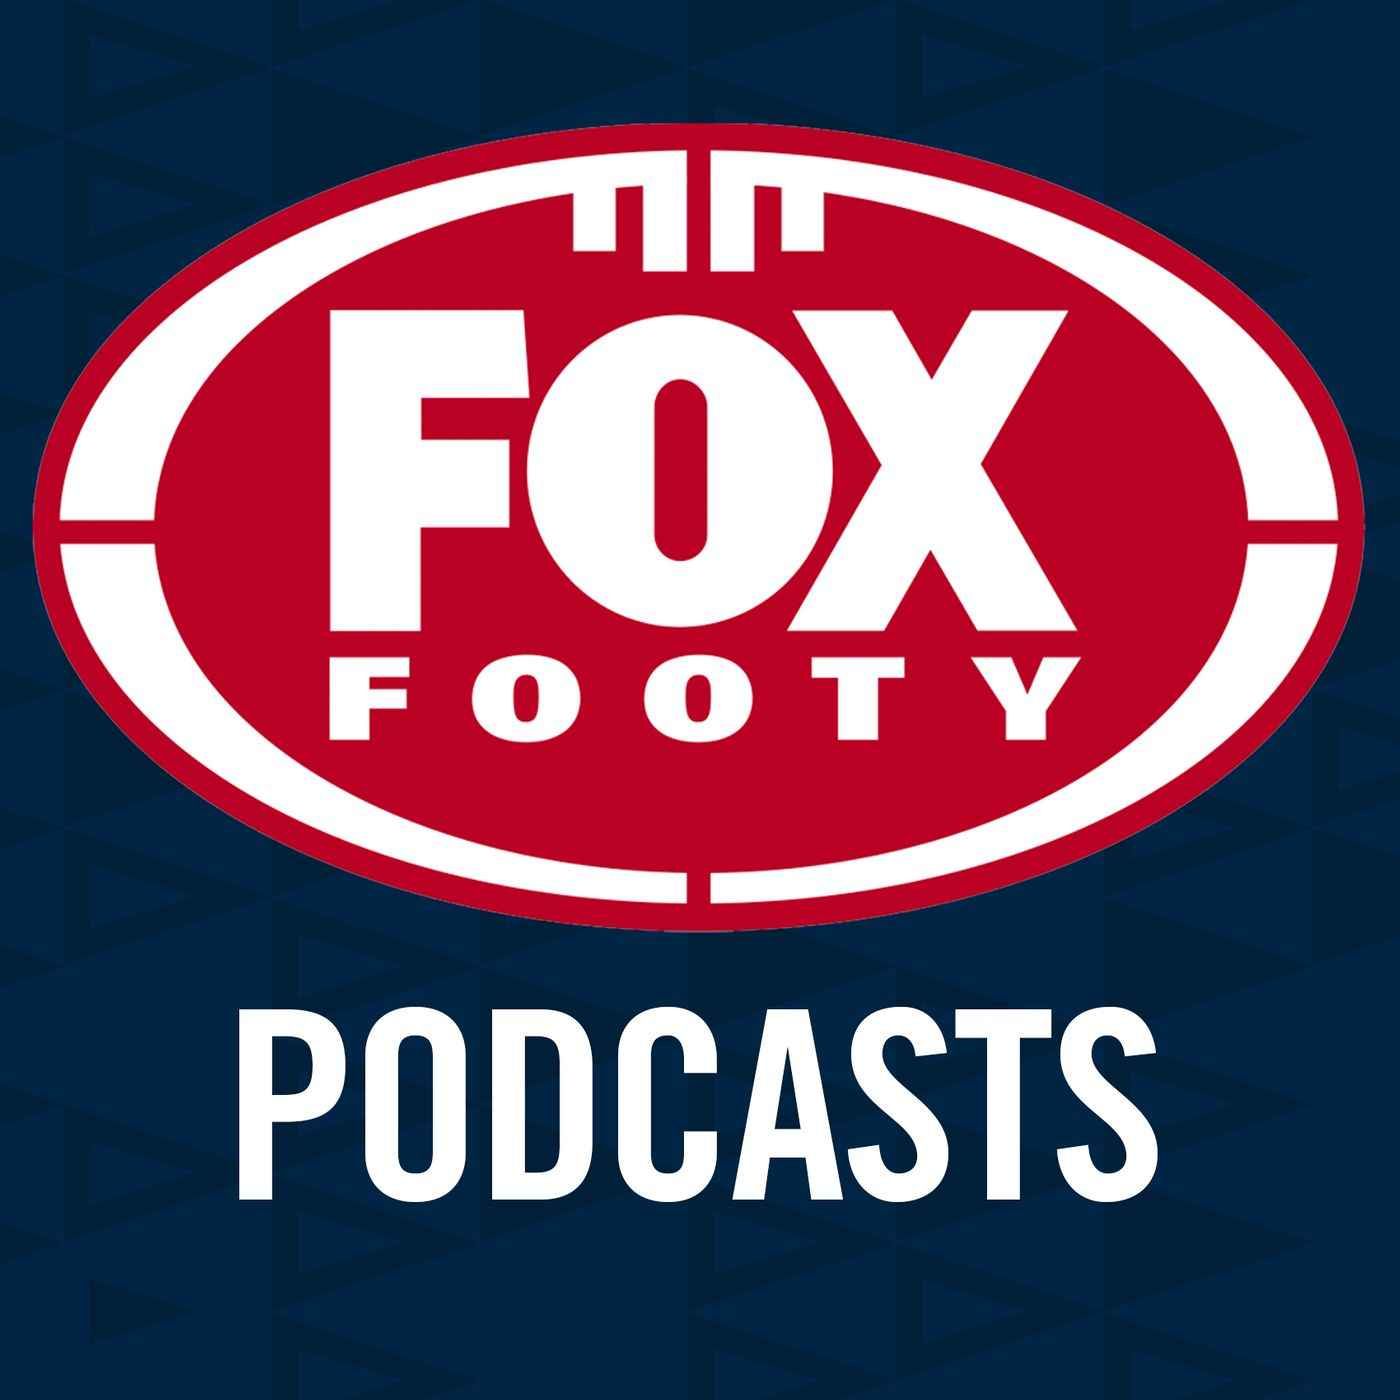 Fox Footy Podcast: Blues' season spirals, how to treat a King